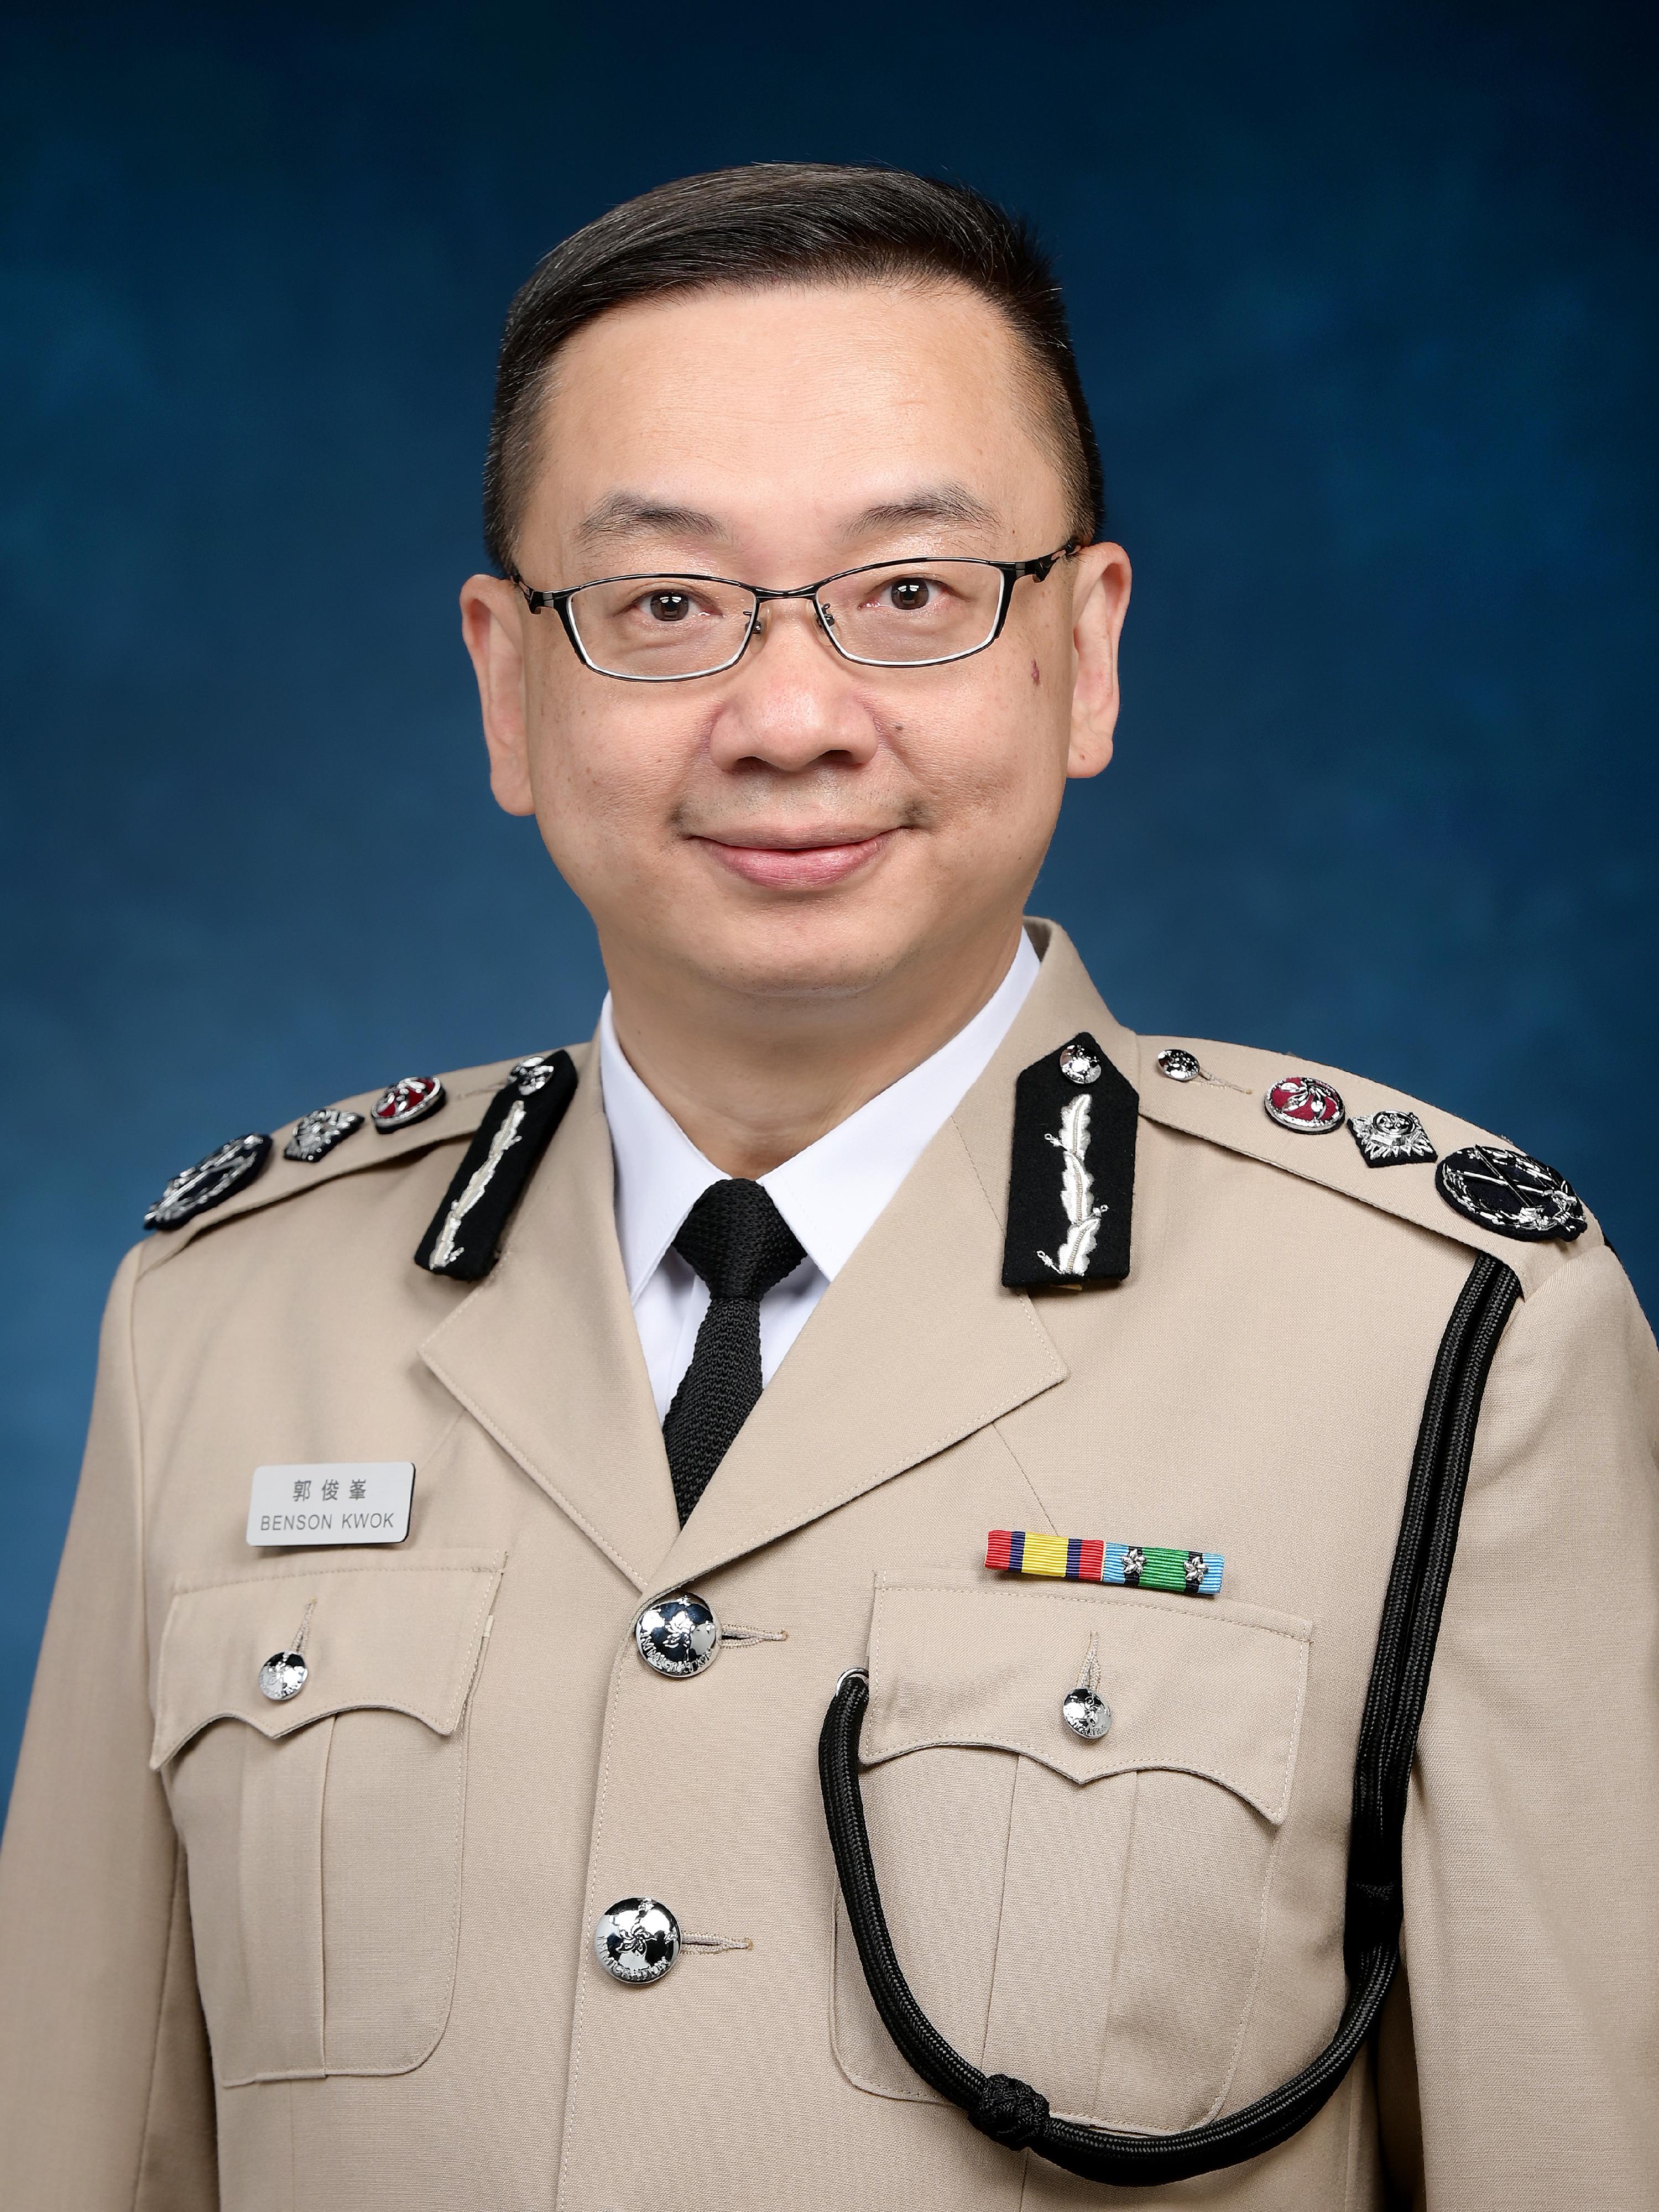 Mr Benson Kwok Joon-fung, Deputy Director of Immigration, takes up the post of Director of Immigration today (September 19).

